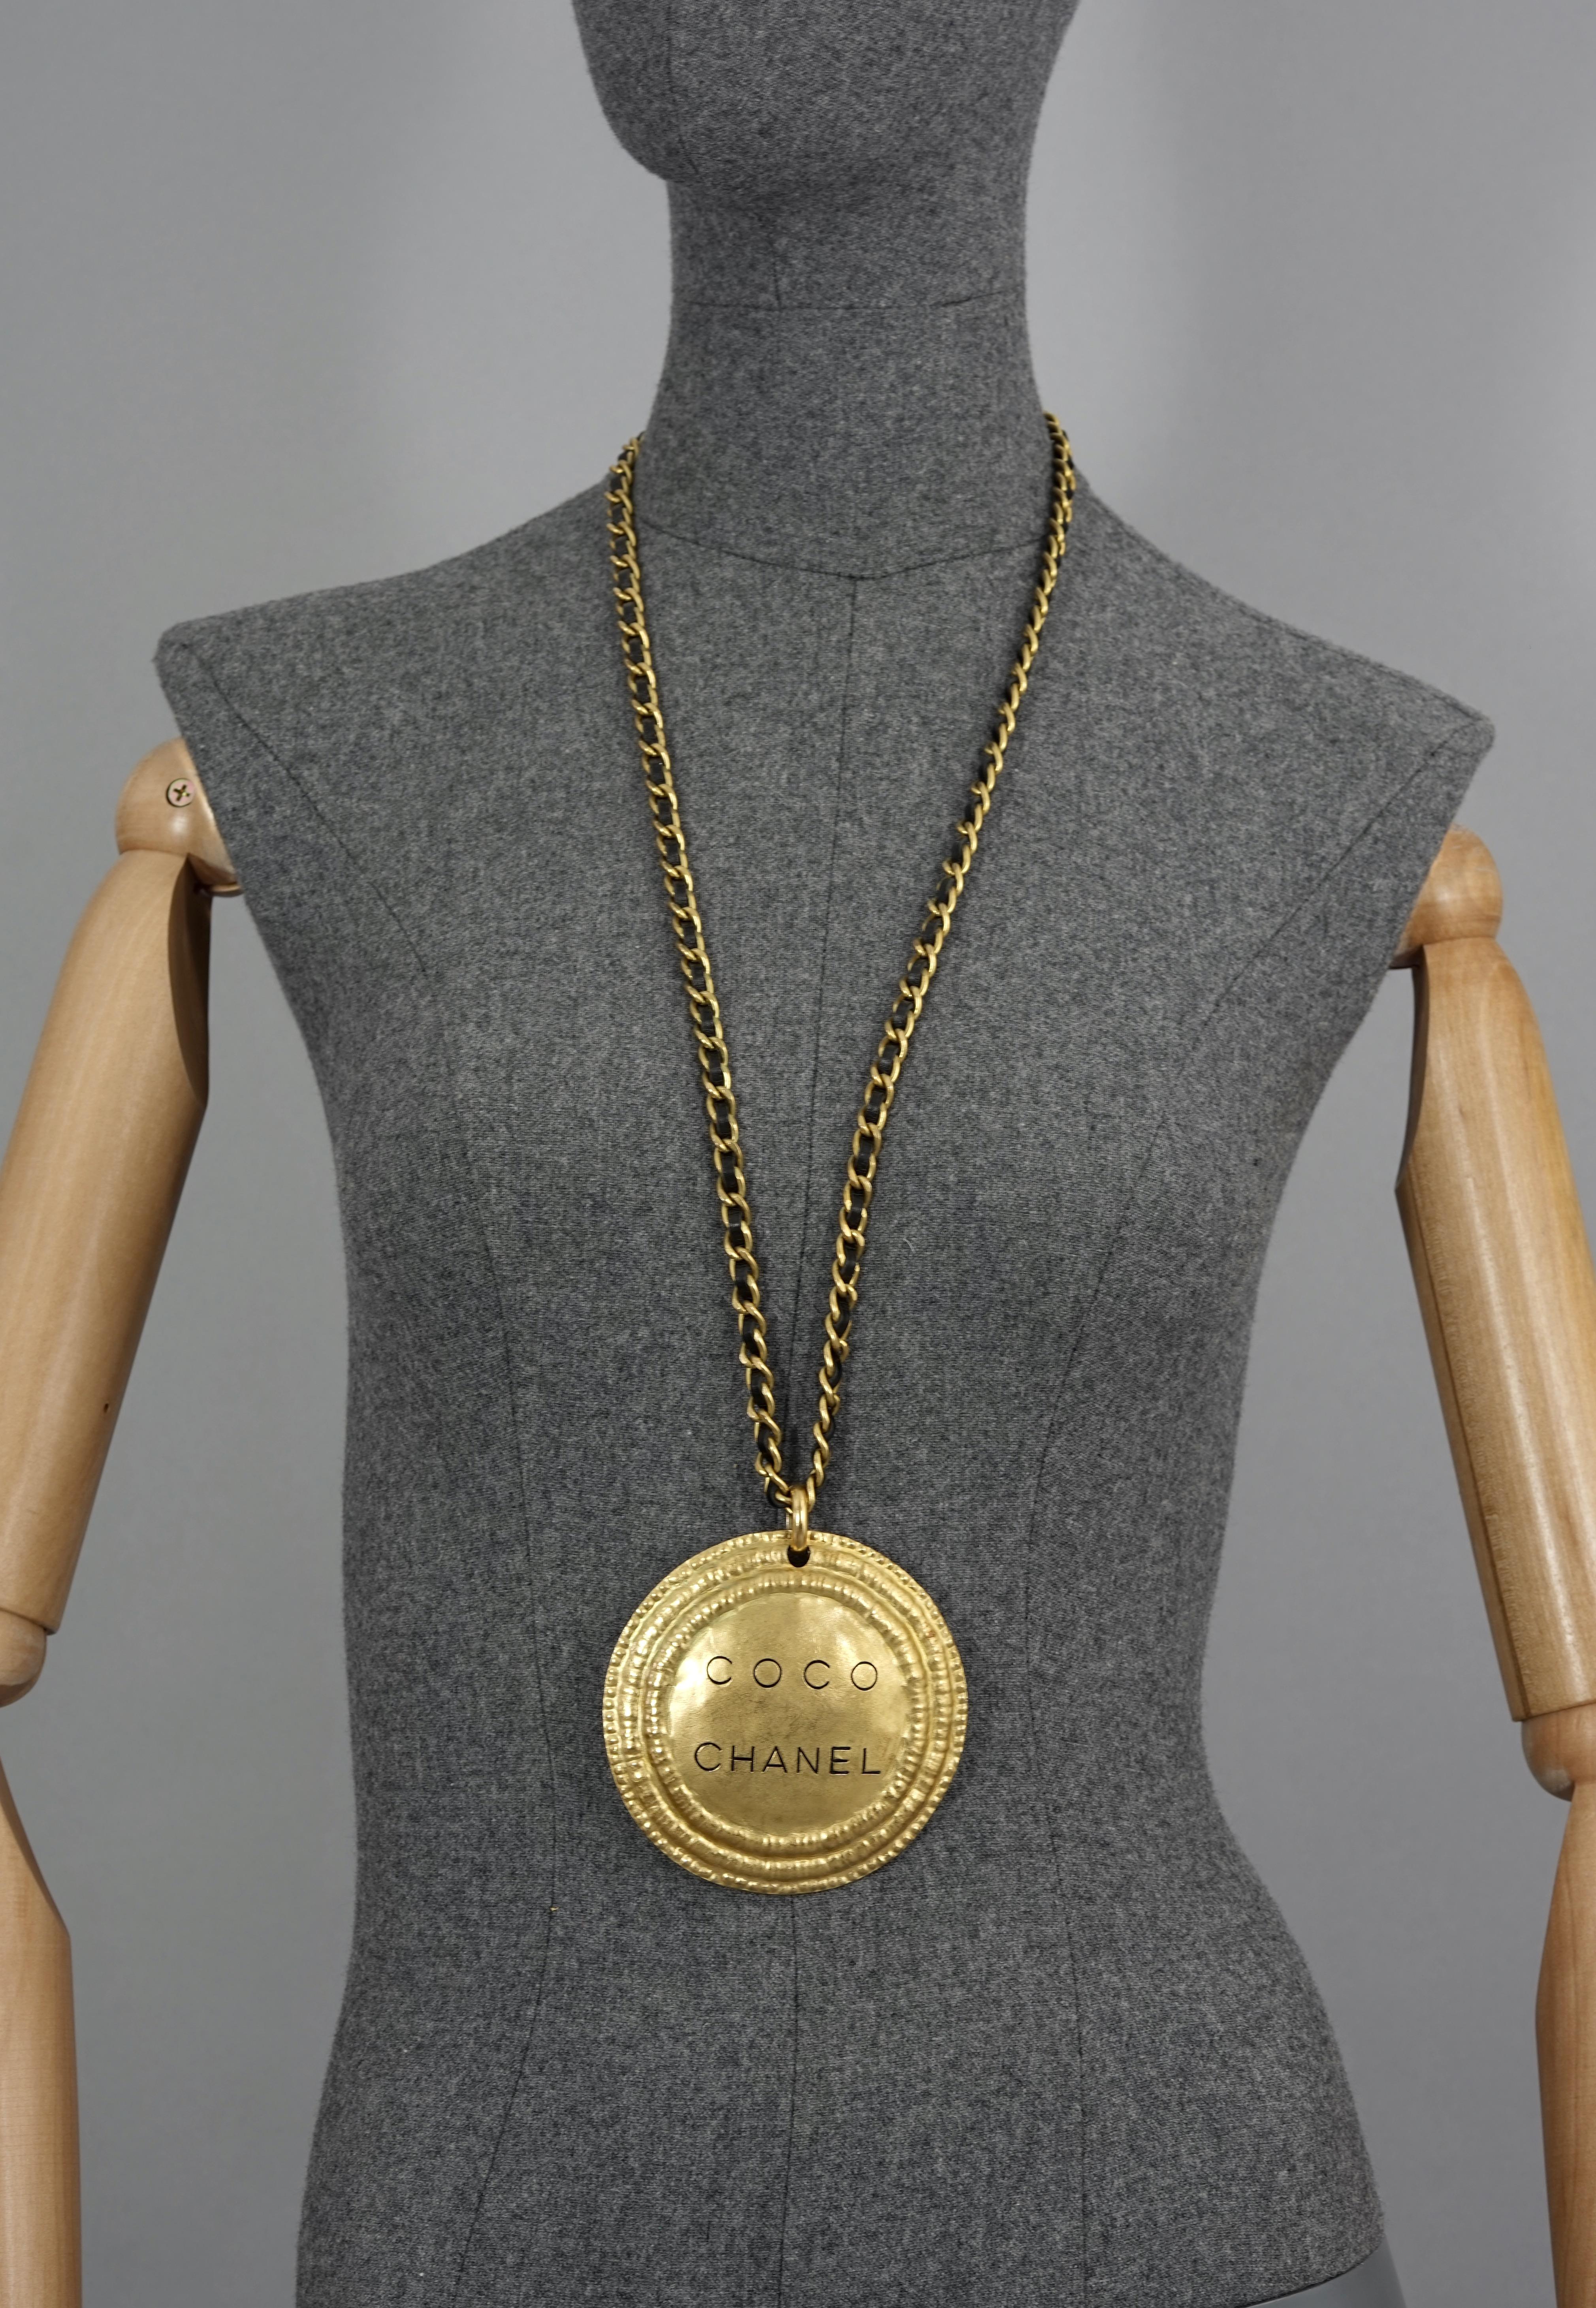 Vintage Massive 1994 CHANEL Coco Medallion Leather Chain Necklace

Measurements:
Height: 1.96 inches (10 cm)
Wearable Length: 15.43 inches (84.5 cm)

Features:
- 100% Authentic CHANEL.
- Massive Coco Chanel medallion.
- Iconic leather and chain